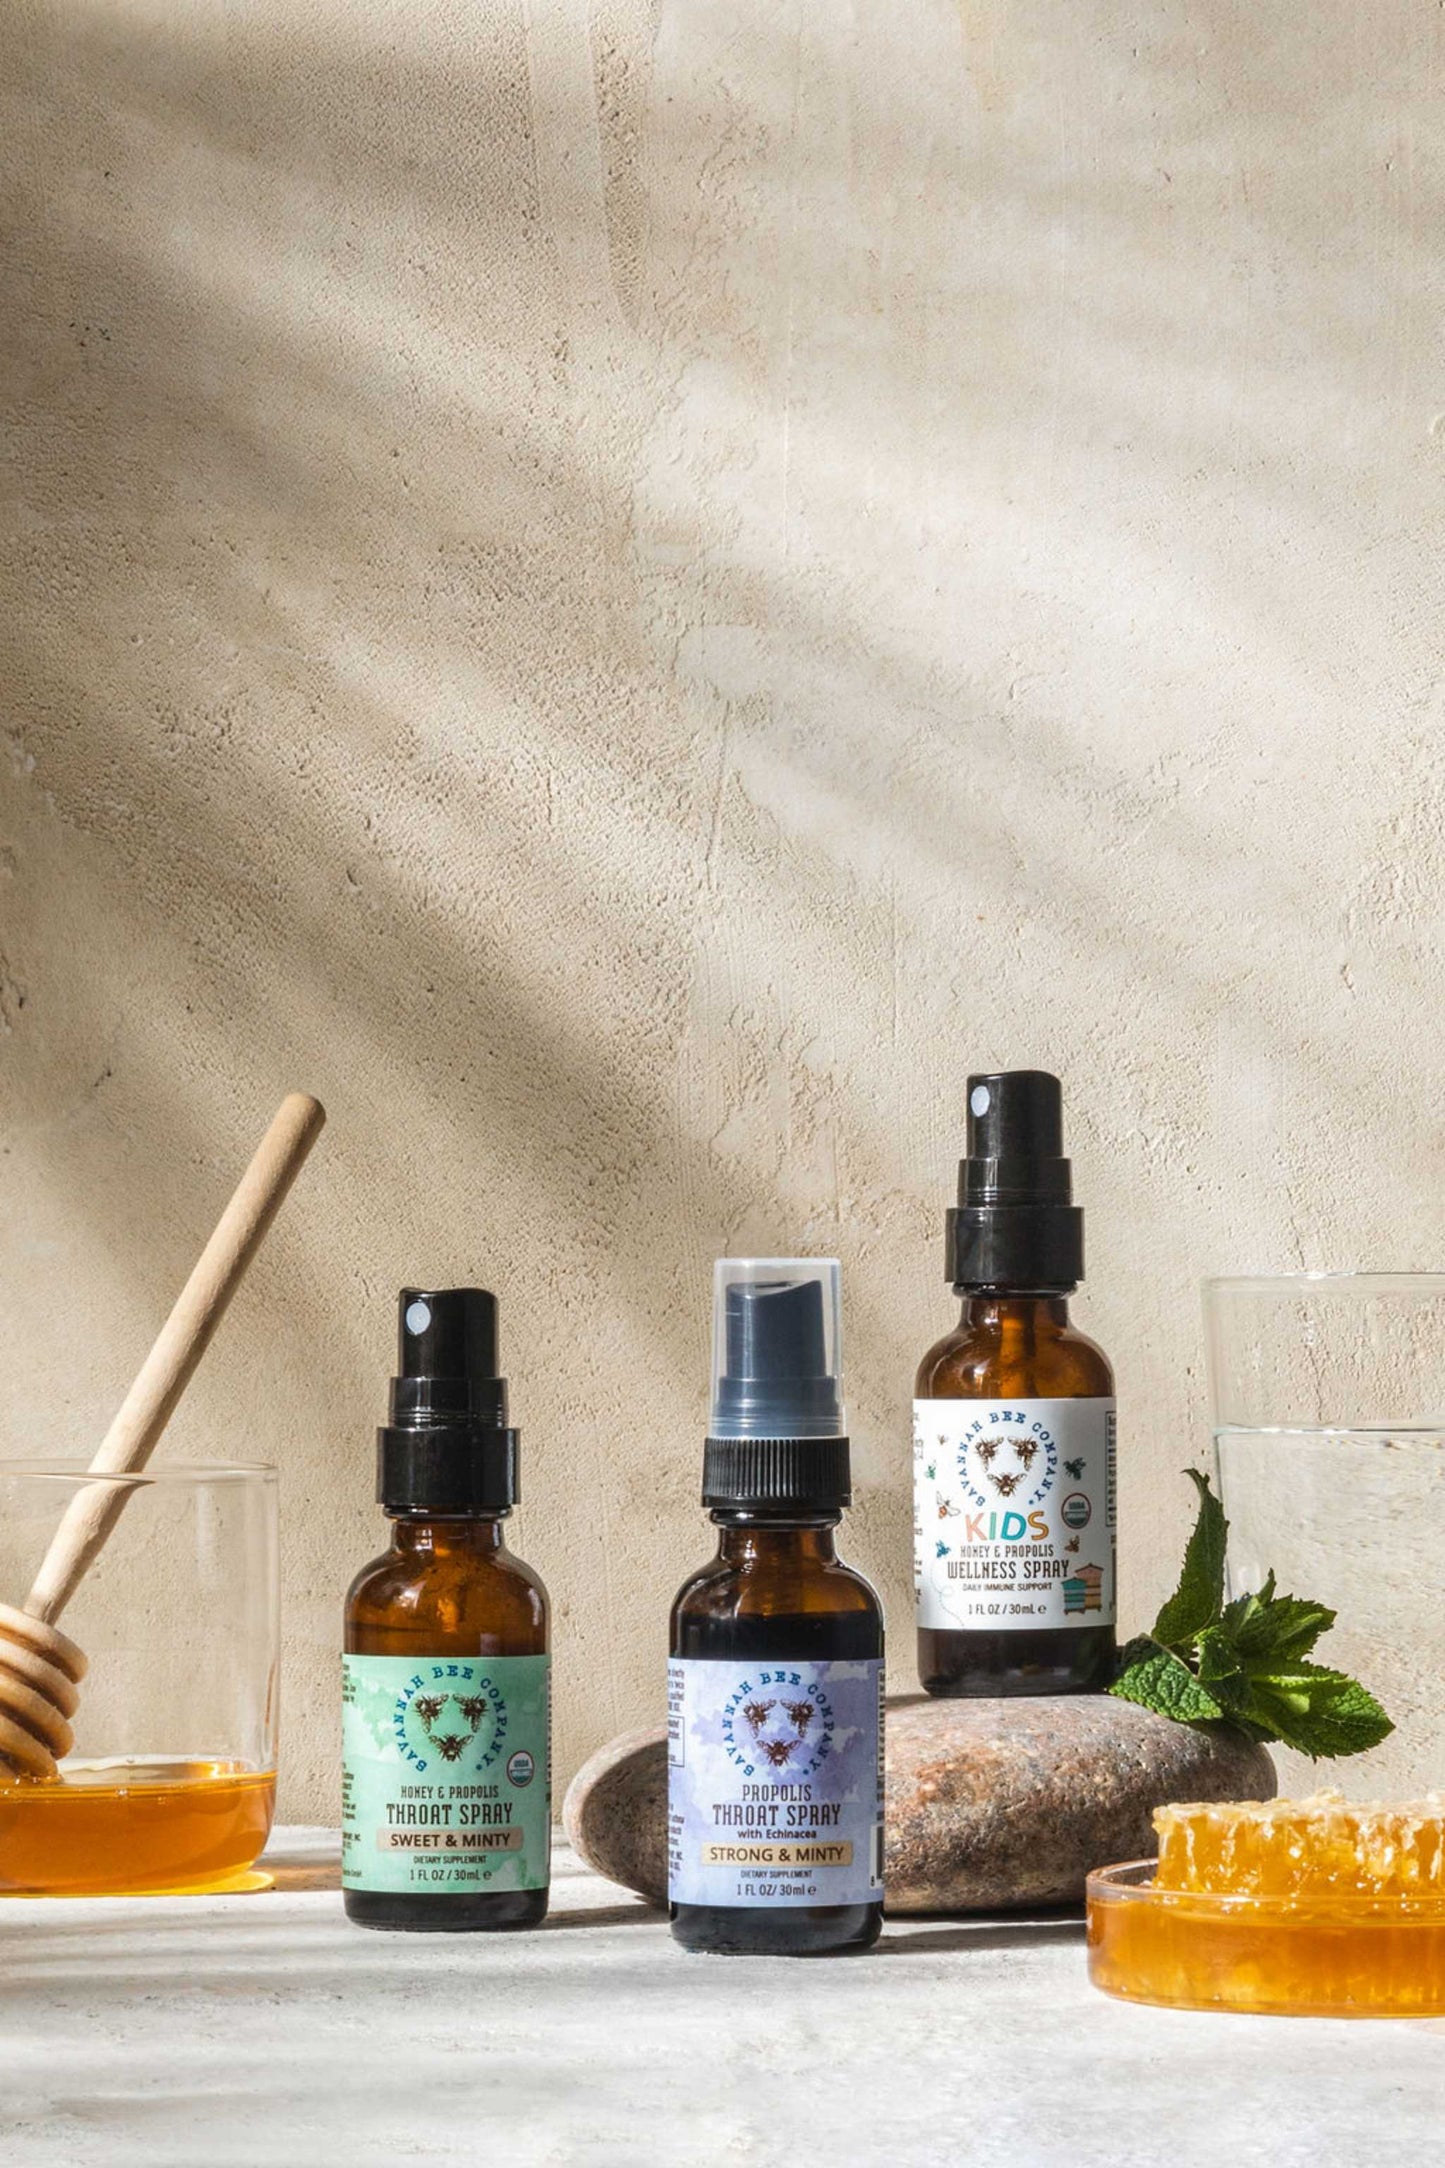 Kids Honey and Propolis Wellness Spray, Strong and Minty Proplois Spray and Sweet and Mint Propolis Spray next to honeycomb and dipper.